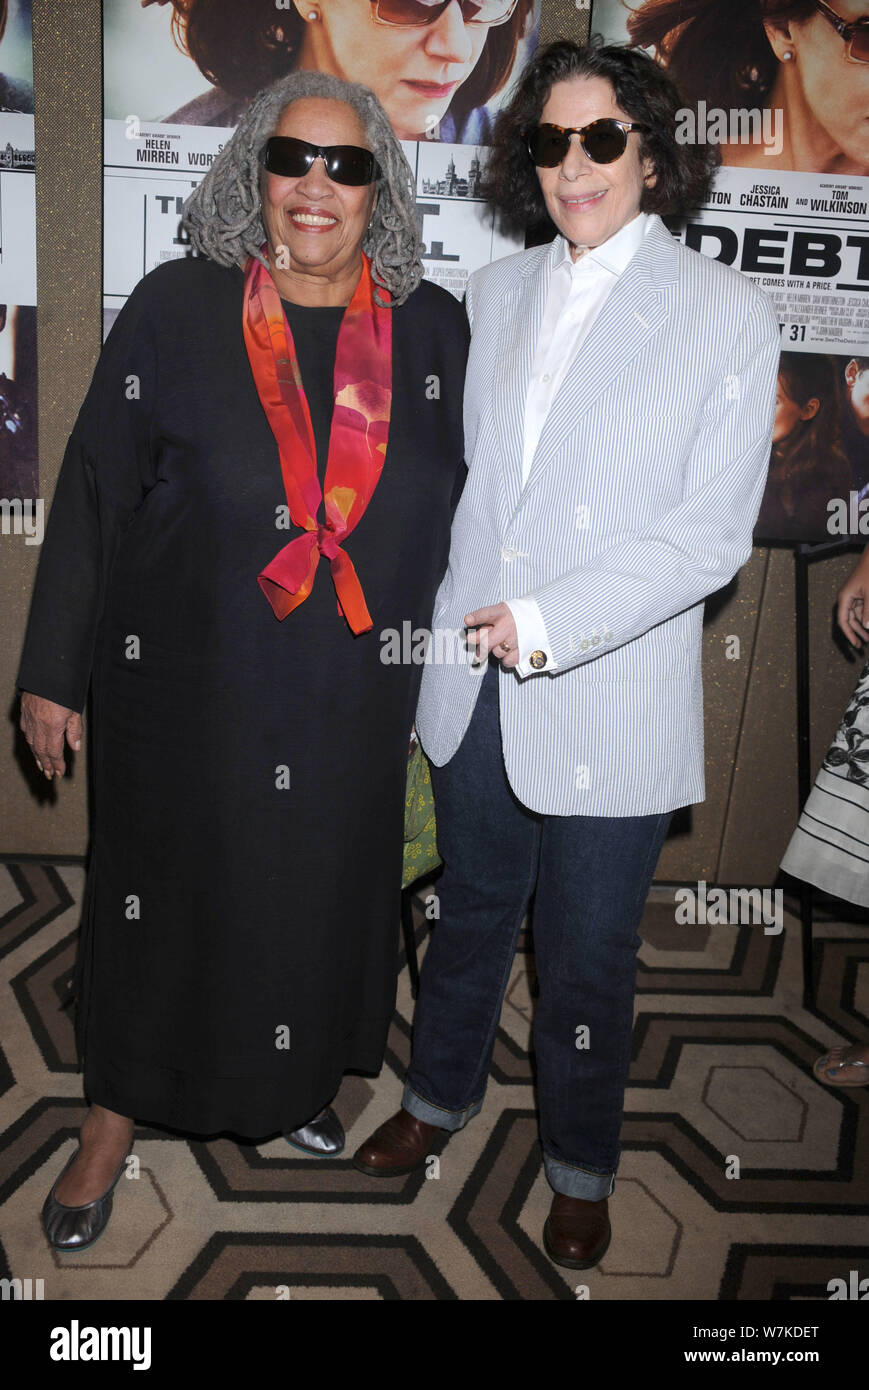 Manhattan, United States Of America. 25th Aug, 2011. NEW YORK, NY - AUGUST 22: Toni Morrison attends 'The Debt' screening at the Tribeca Grand Hotel - Screening Room on August 22, 2011 in New York City. People: Toni Morrison, Annie Leibovitz Credit: Storms Media Group/Alamy Live News Stock Photo